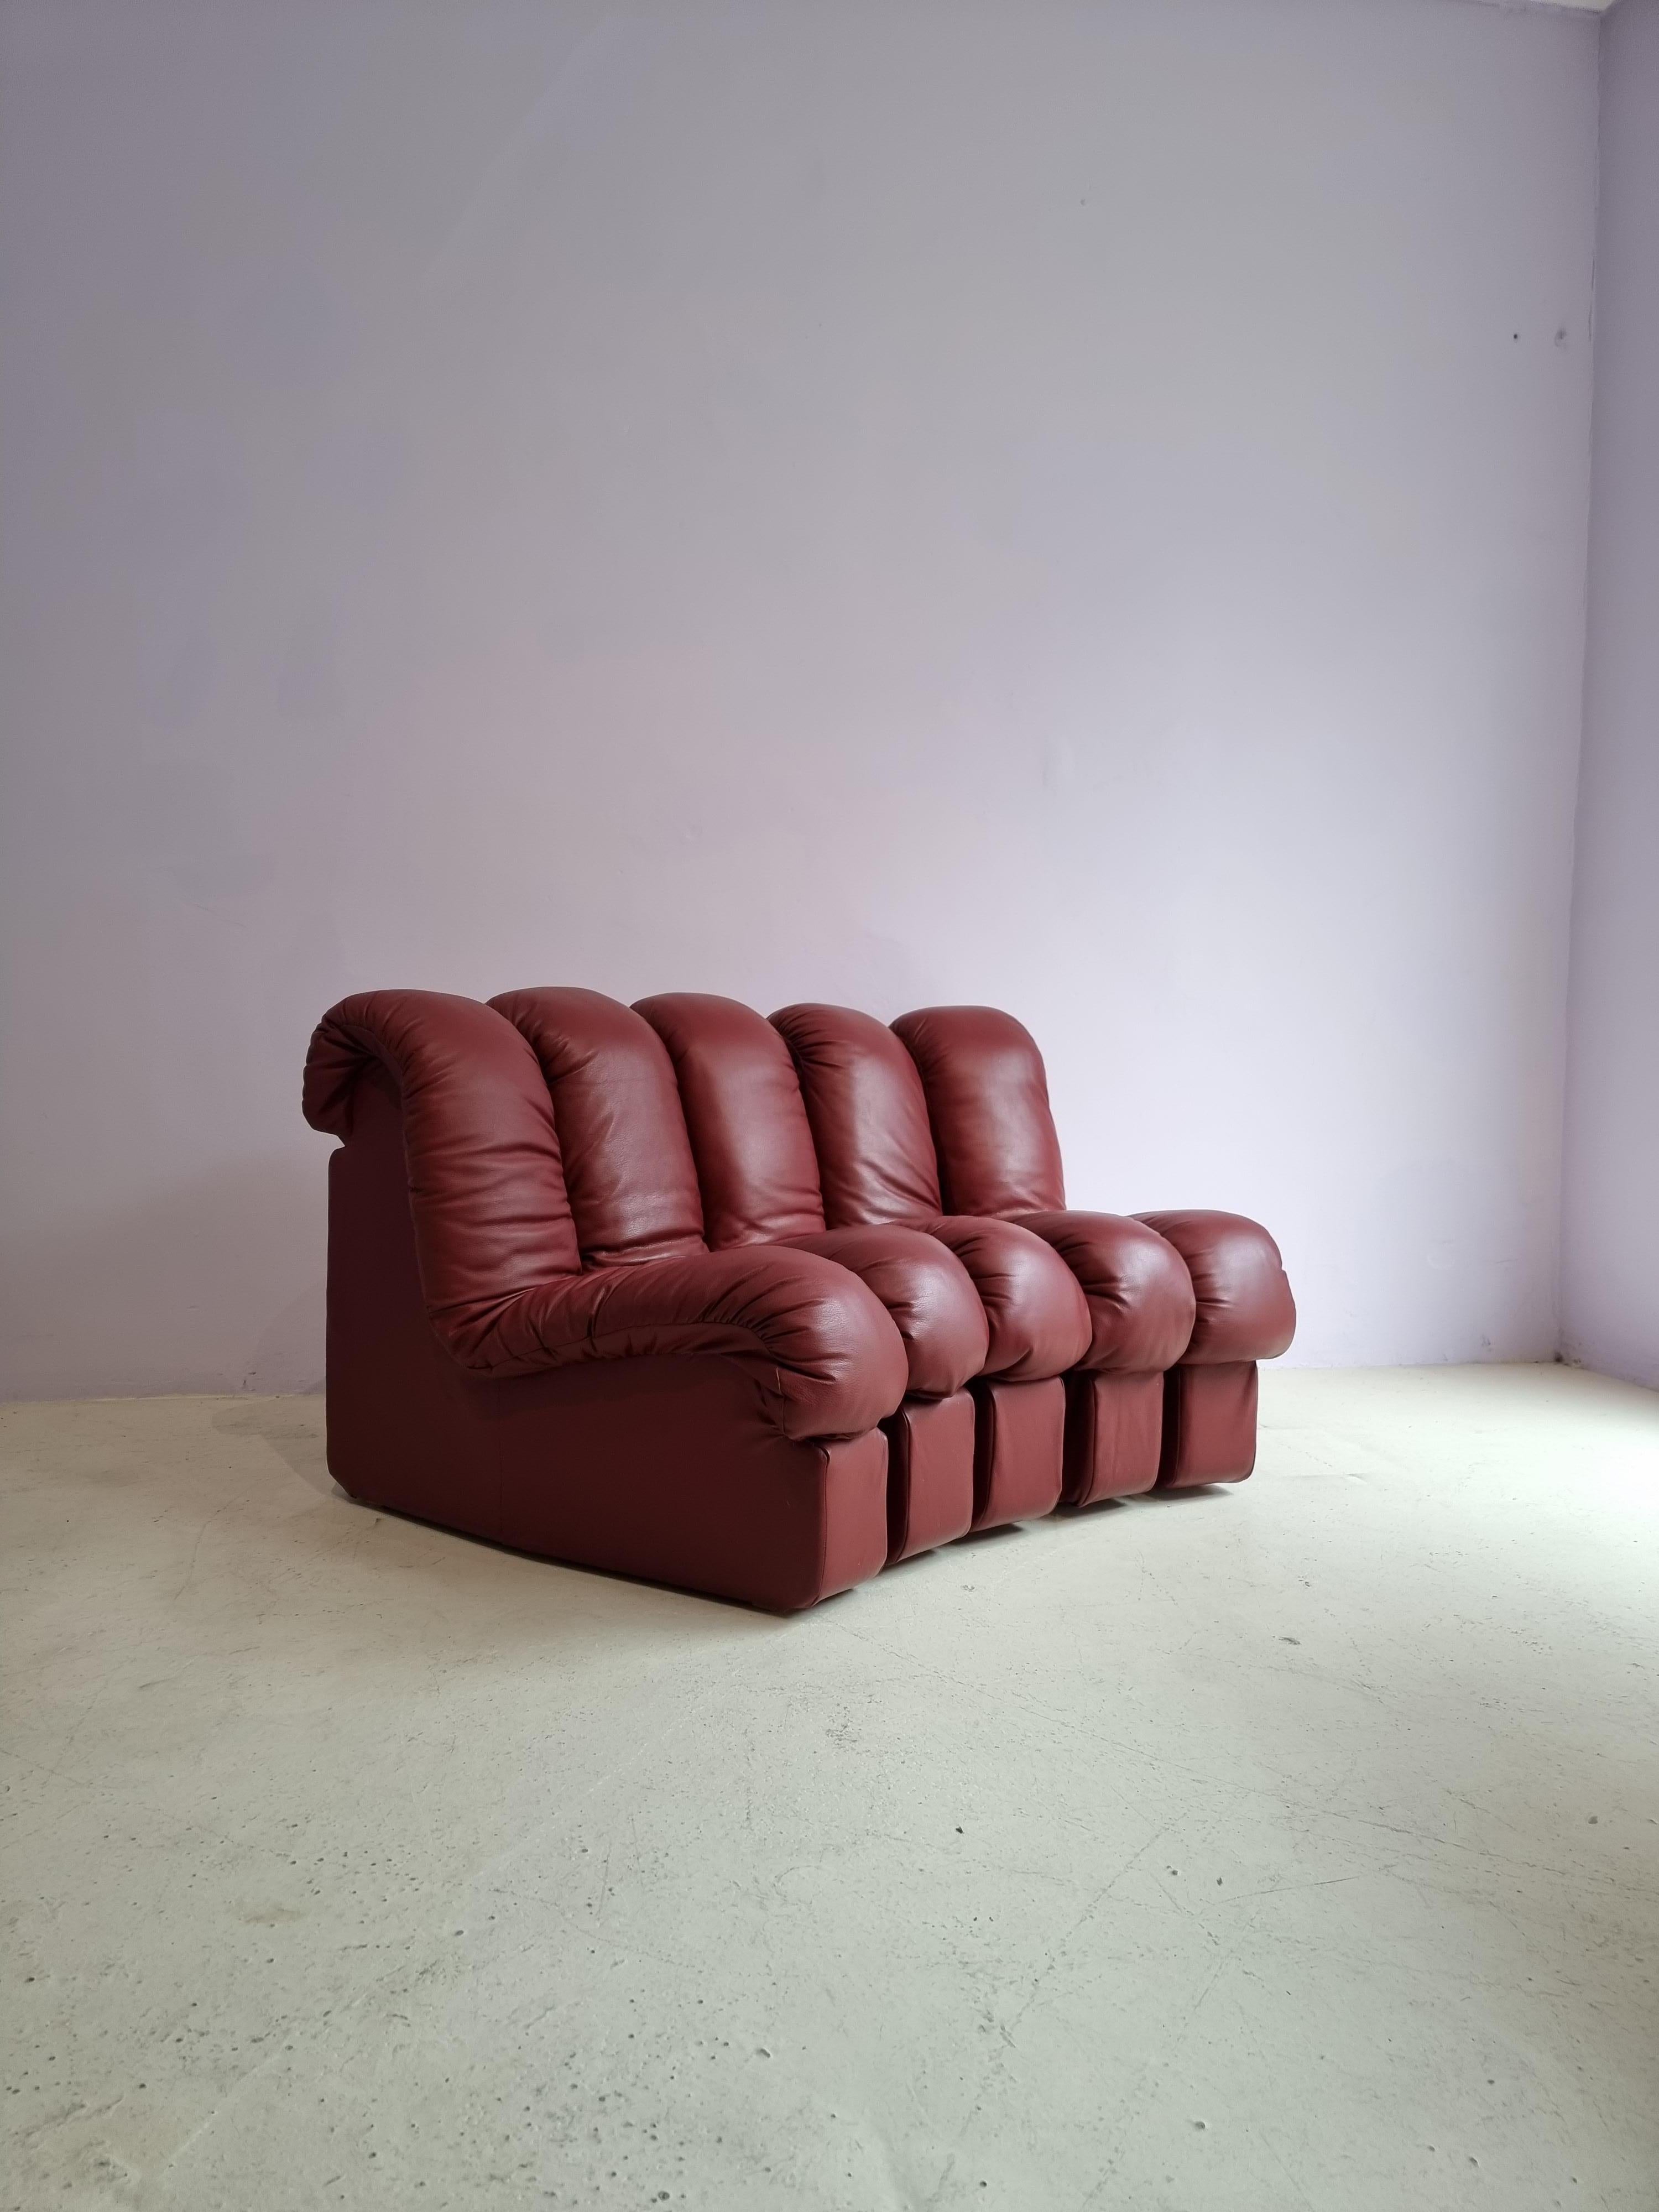 De Sede, sofa model ‘DS-600' sofa, bordeaux leather, Switzerland, designed in 1972.

A design by Ueli Bergere, Elenora Peduzzi-Riva, Heinz Ulrich and Klaus Vogt at DeSede, Switzerland.

De Sede 'Non Stop' sectional sofa contains 5 seating pieces